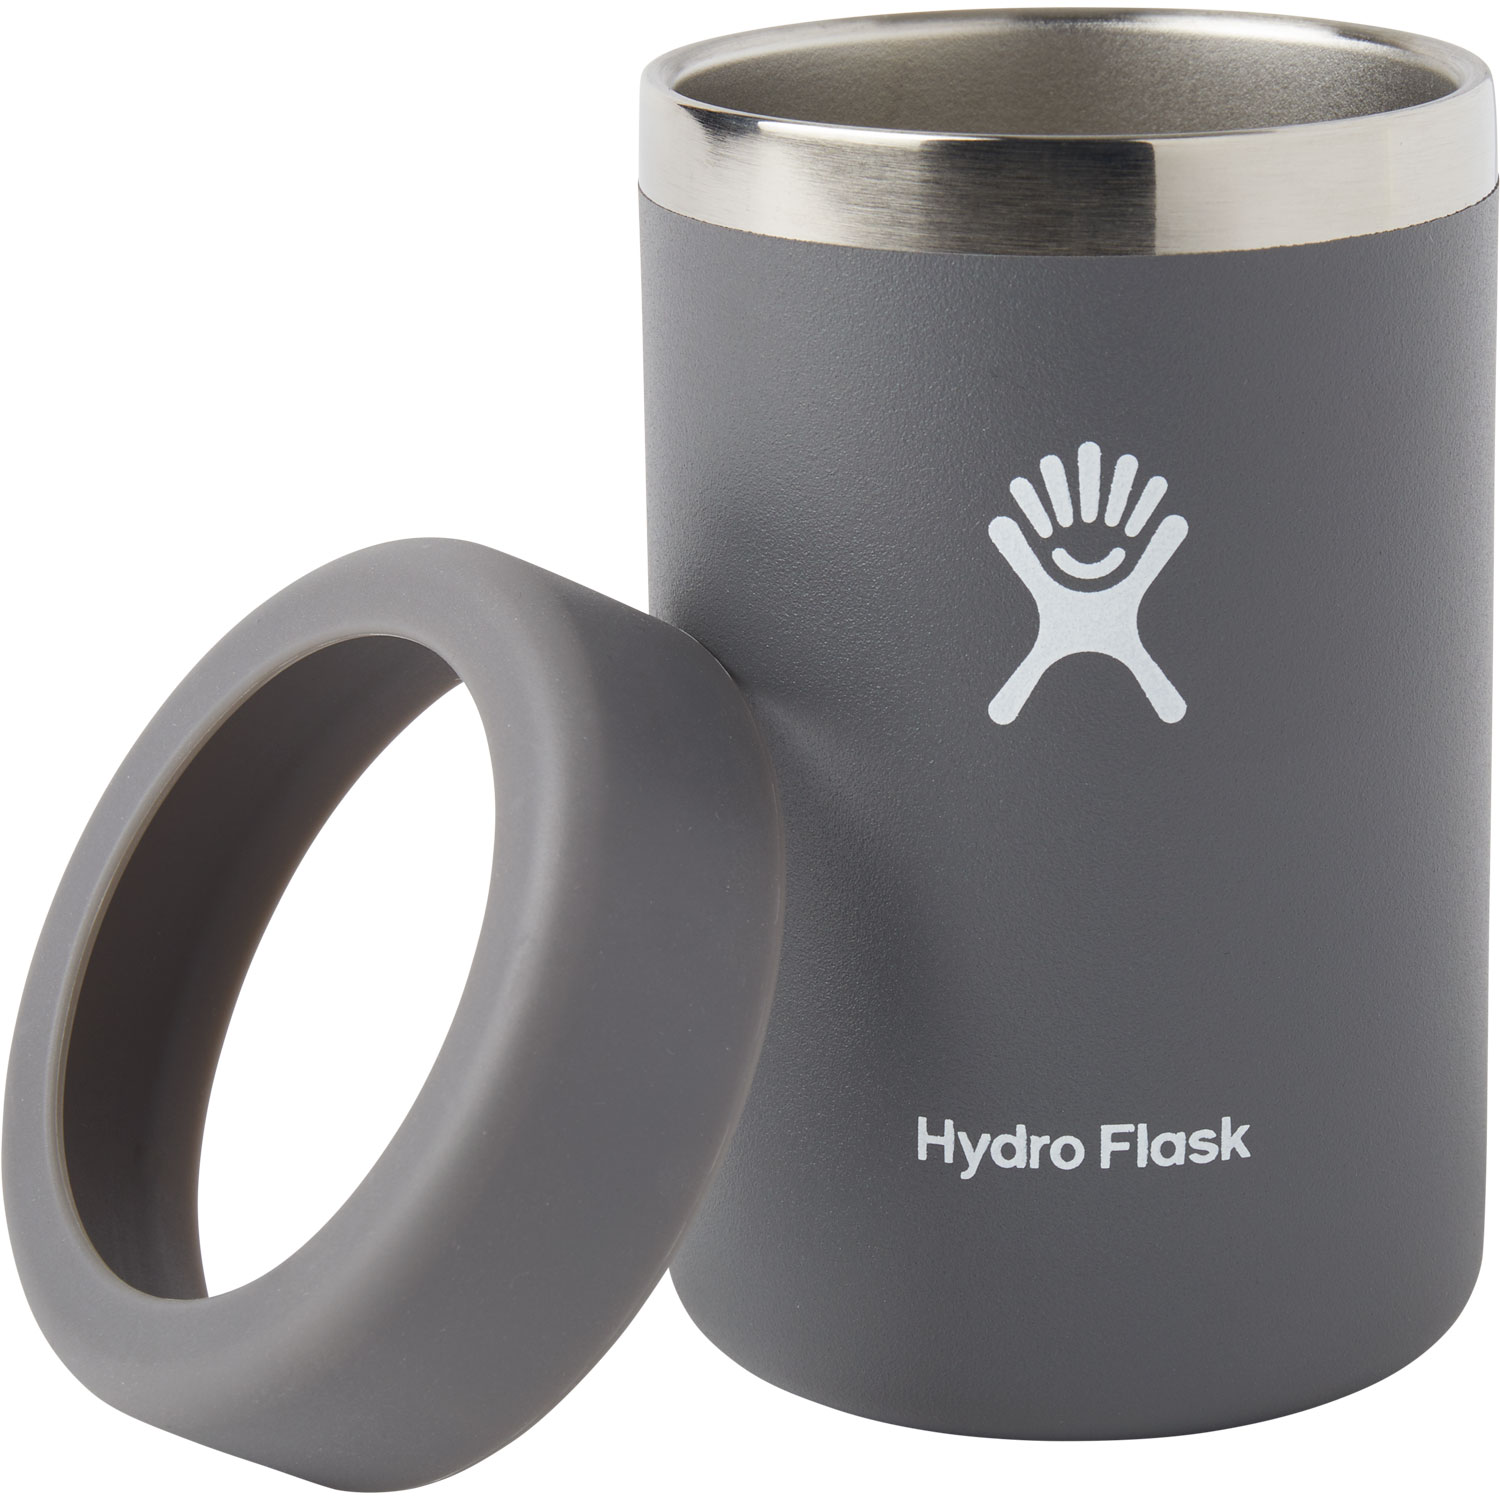 The Hydro Flask Cooler Cup is a life-saver for those hot summer picnics -  Yanko Design